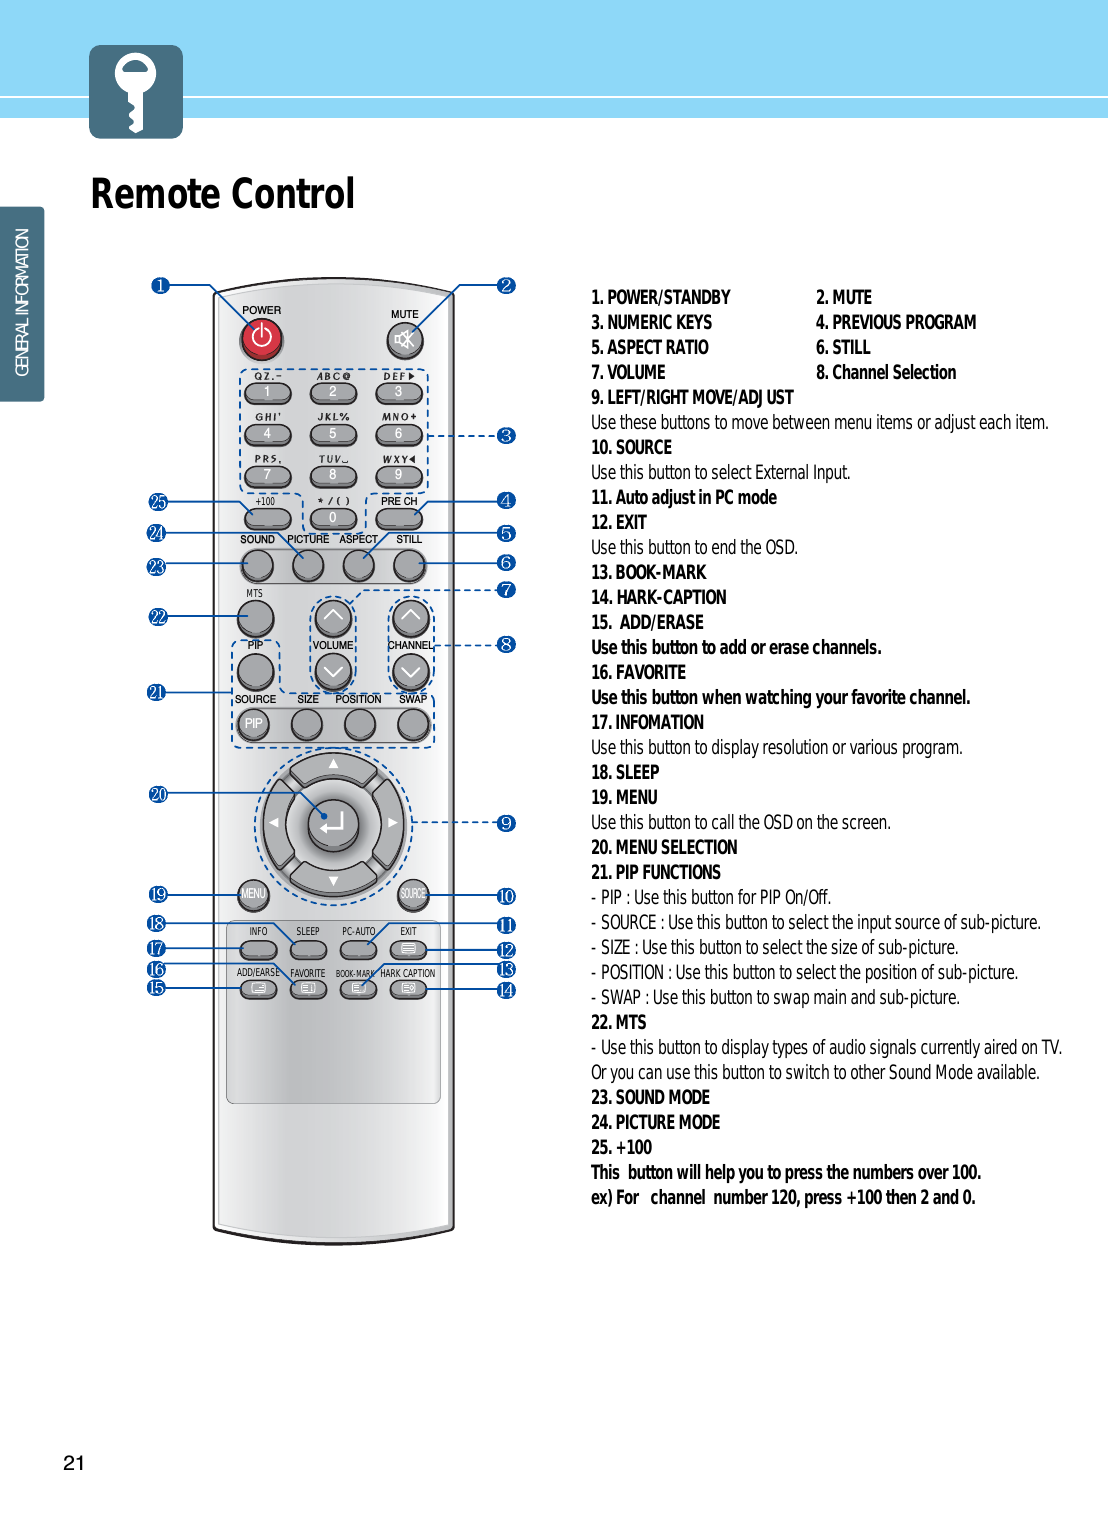 21GENERAL INFORMATIONRemote Control 1 203475869PIPSOURCEMENUMUTEPRE CHSOUNDVOLUMEPIPSOURCEINFO SLEEP PC-AUTO EXITADD/EARSE+100MTSFAVORITEBOOK-MARKHARK CAPTIONSIZE POSITION SWAPCHANNELPICTURE ASPECT STILLPOWER1. POWER/STANDBY 2. MUTE3. NUMERIC KEYS 4. PREVIOUS PROGRAM5. ASPECT RATIO 6. STILL 7. VOLUME 8. Channel Selection9. LEFT/RIGHT MOVE/ADJUSTUse these buttons to move between menu items or adjust each item.10. SOURCEUse this button to select External Input.11. Auto adjust in PC mode12. EXITUse this button to end the OSD.13. BOOK-MARK14. HARK-CAPTION15. ADD/ERASEUse this button to add or erase channels.16.FAVORITE Use this button when watching your favorite channel.17. INFOMATIONUse this button to display resolution or various program.18. SLEEP19. MENUUse this button to call the OSD on the screen.20. MENU SELECTION21. PIP FUNCTIONS- PIP : Use this button for PIP On/Off.- SOURCE : Use this button to select the input source of sub-picture.- SIZE : Use this button to select the size of sub-picture.- POSITION : Use this button to select the position of sub-picture.- SWAP : Use this button to swap main and sub-picture.22. MTS- Use this button to display types of audio signals currently aired on TV.Or you can use this button to switch to other Sound Mode available.23. SOUND MODE24. PICTURE MODE25. +100This  button will help you to press the numbers over 100.ex) For  channel  number 120, press +100 then 2 and 0.